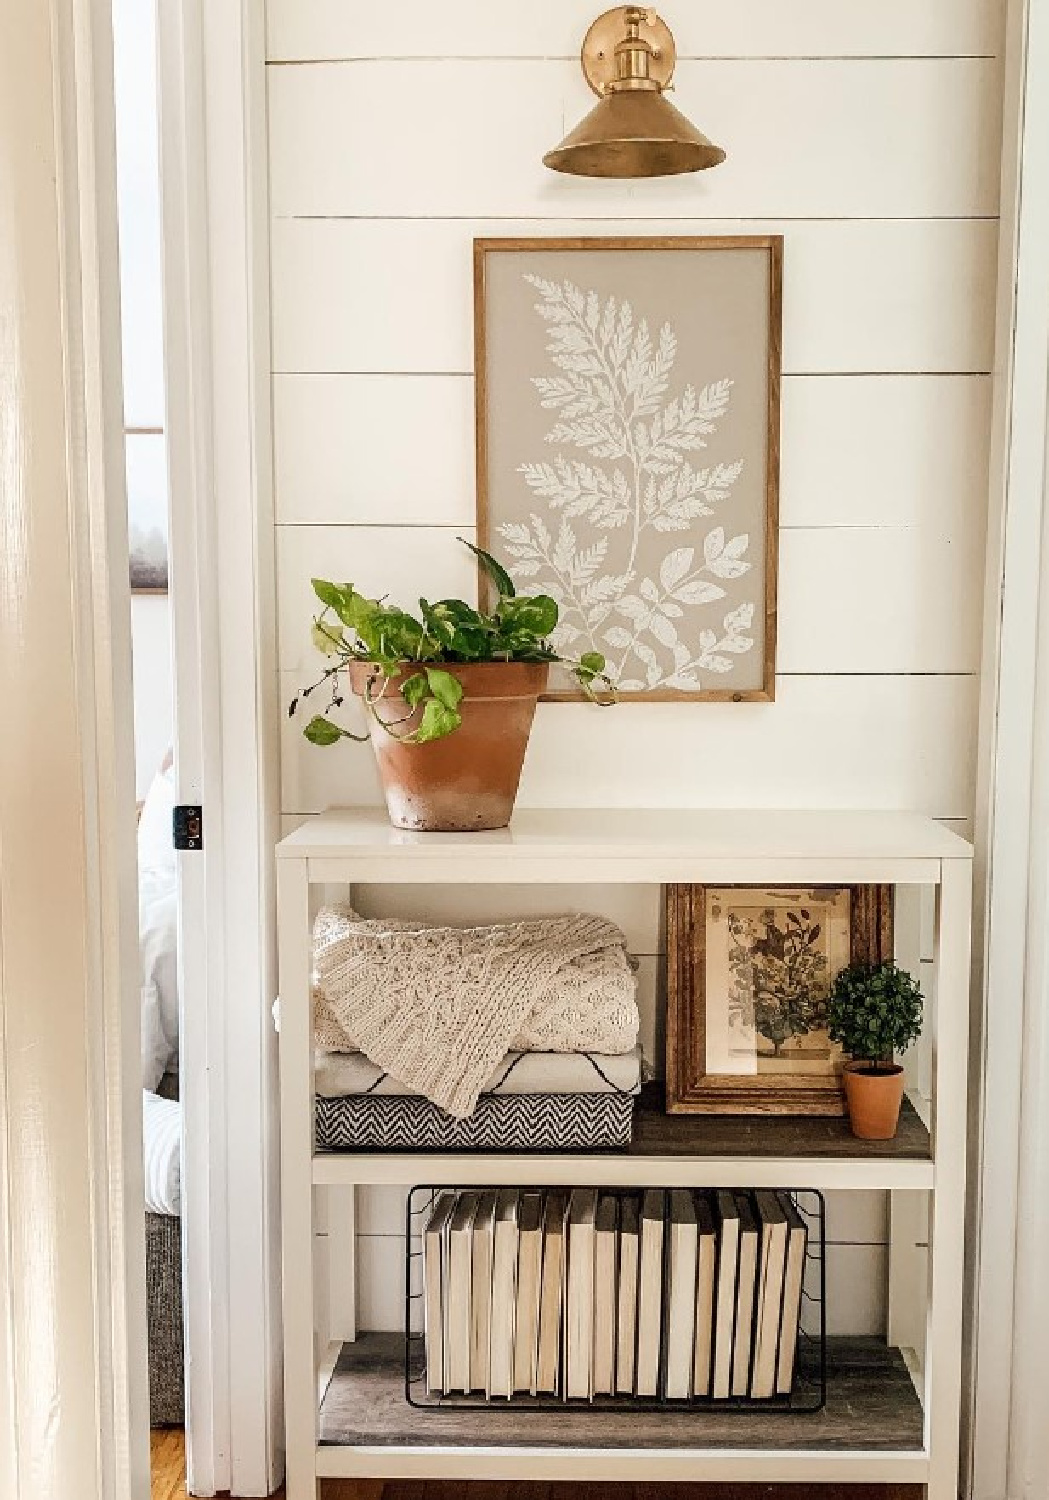 BM Simply white on shiplap in a hall - @updatemycape. #bmsimplywhite